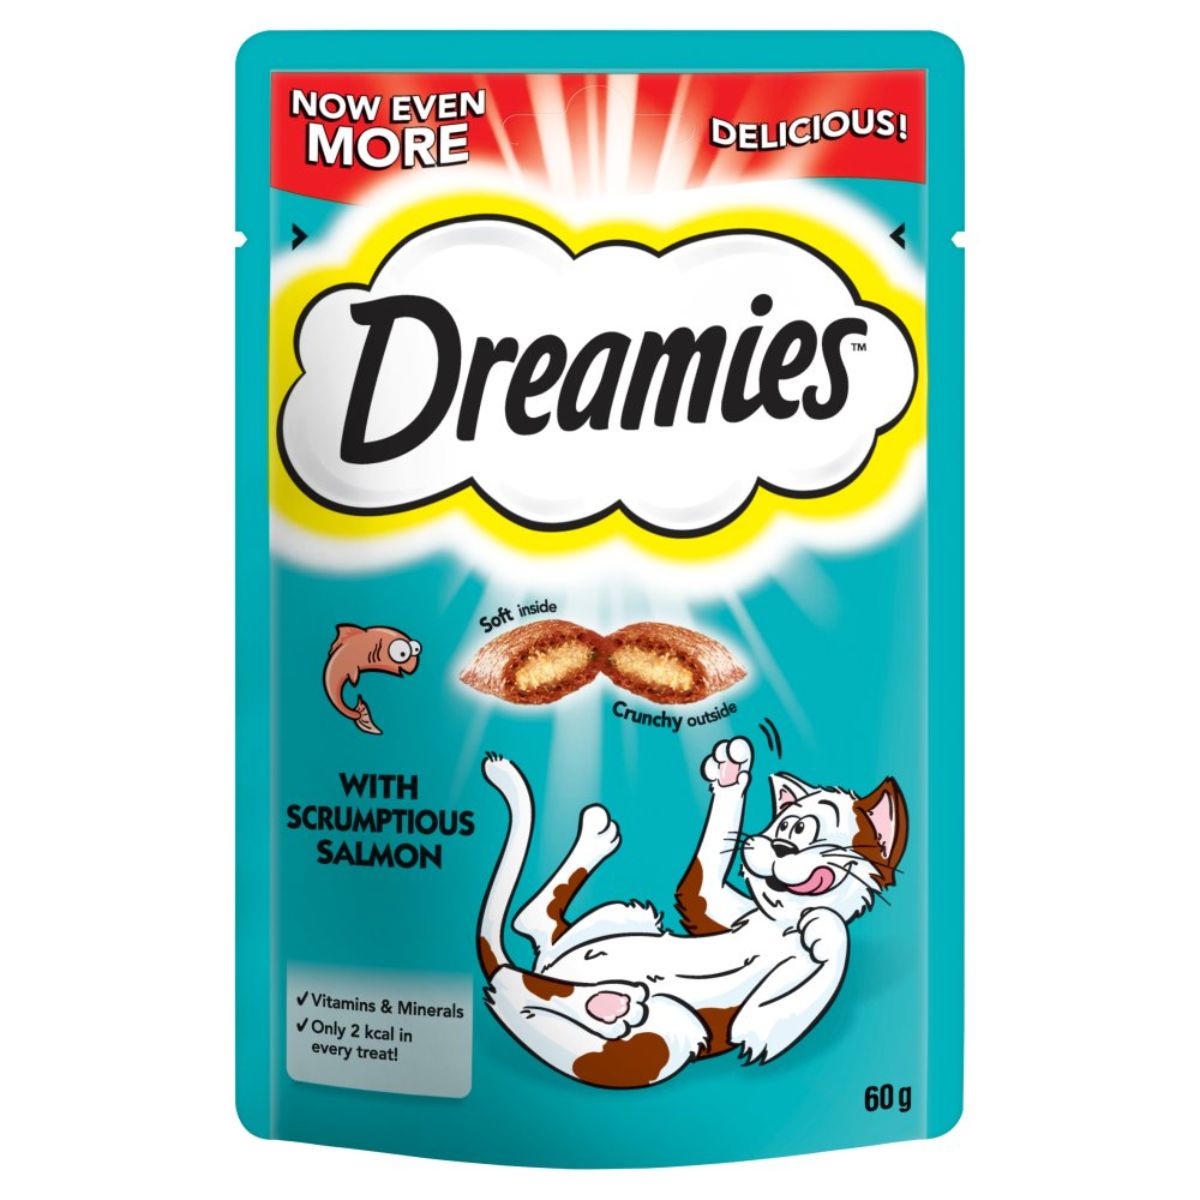 Dreamies - with Scrumptious Salmon - 60g cat treats.